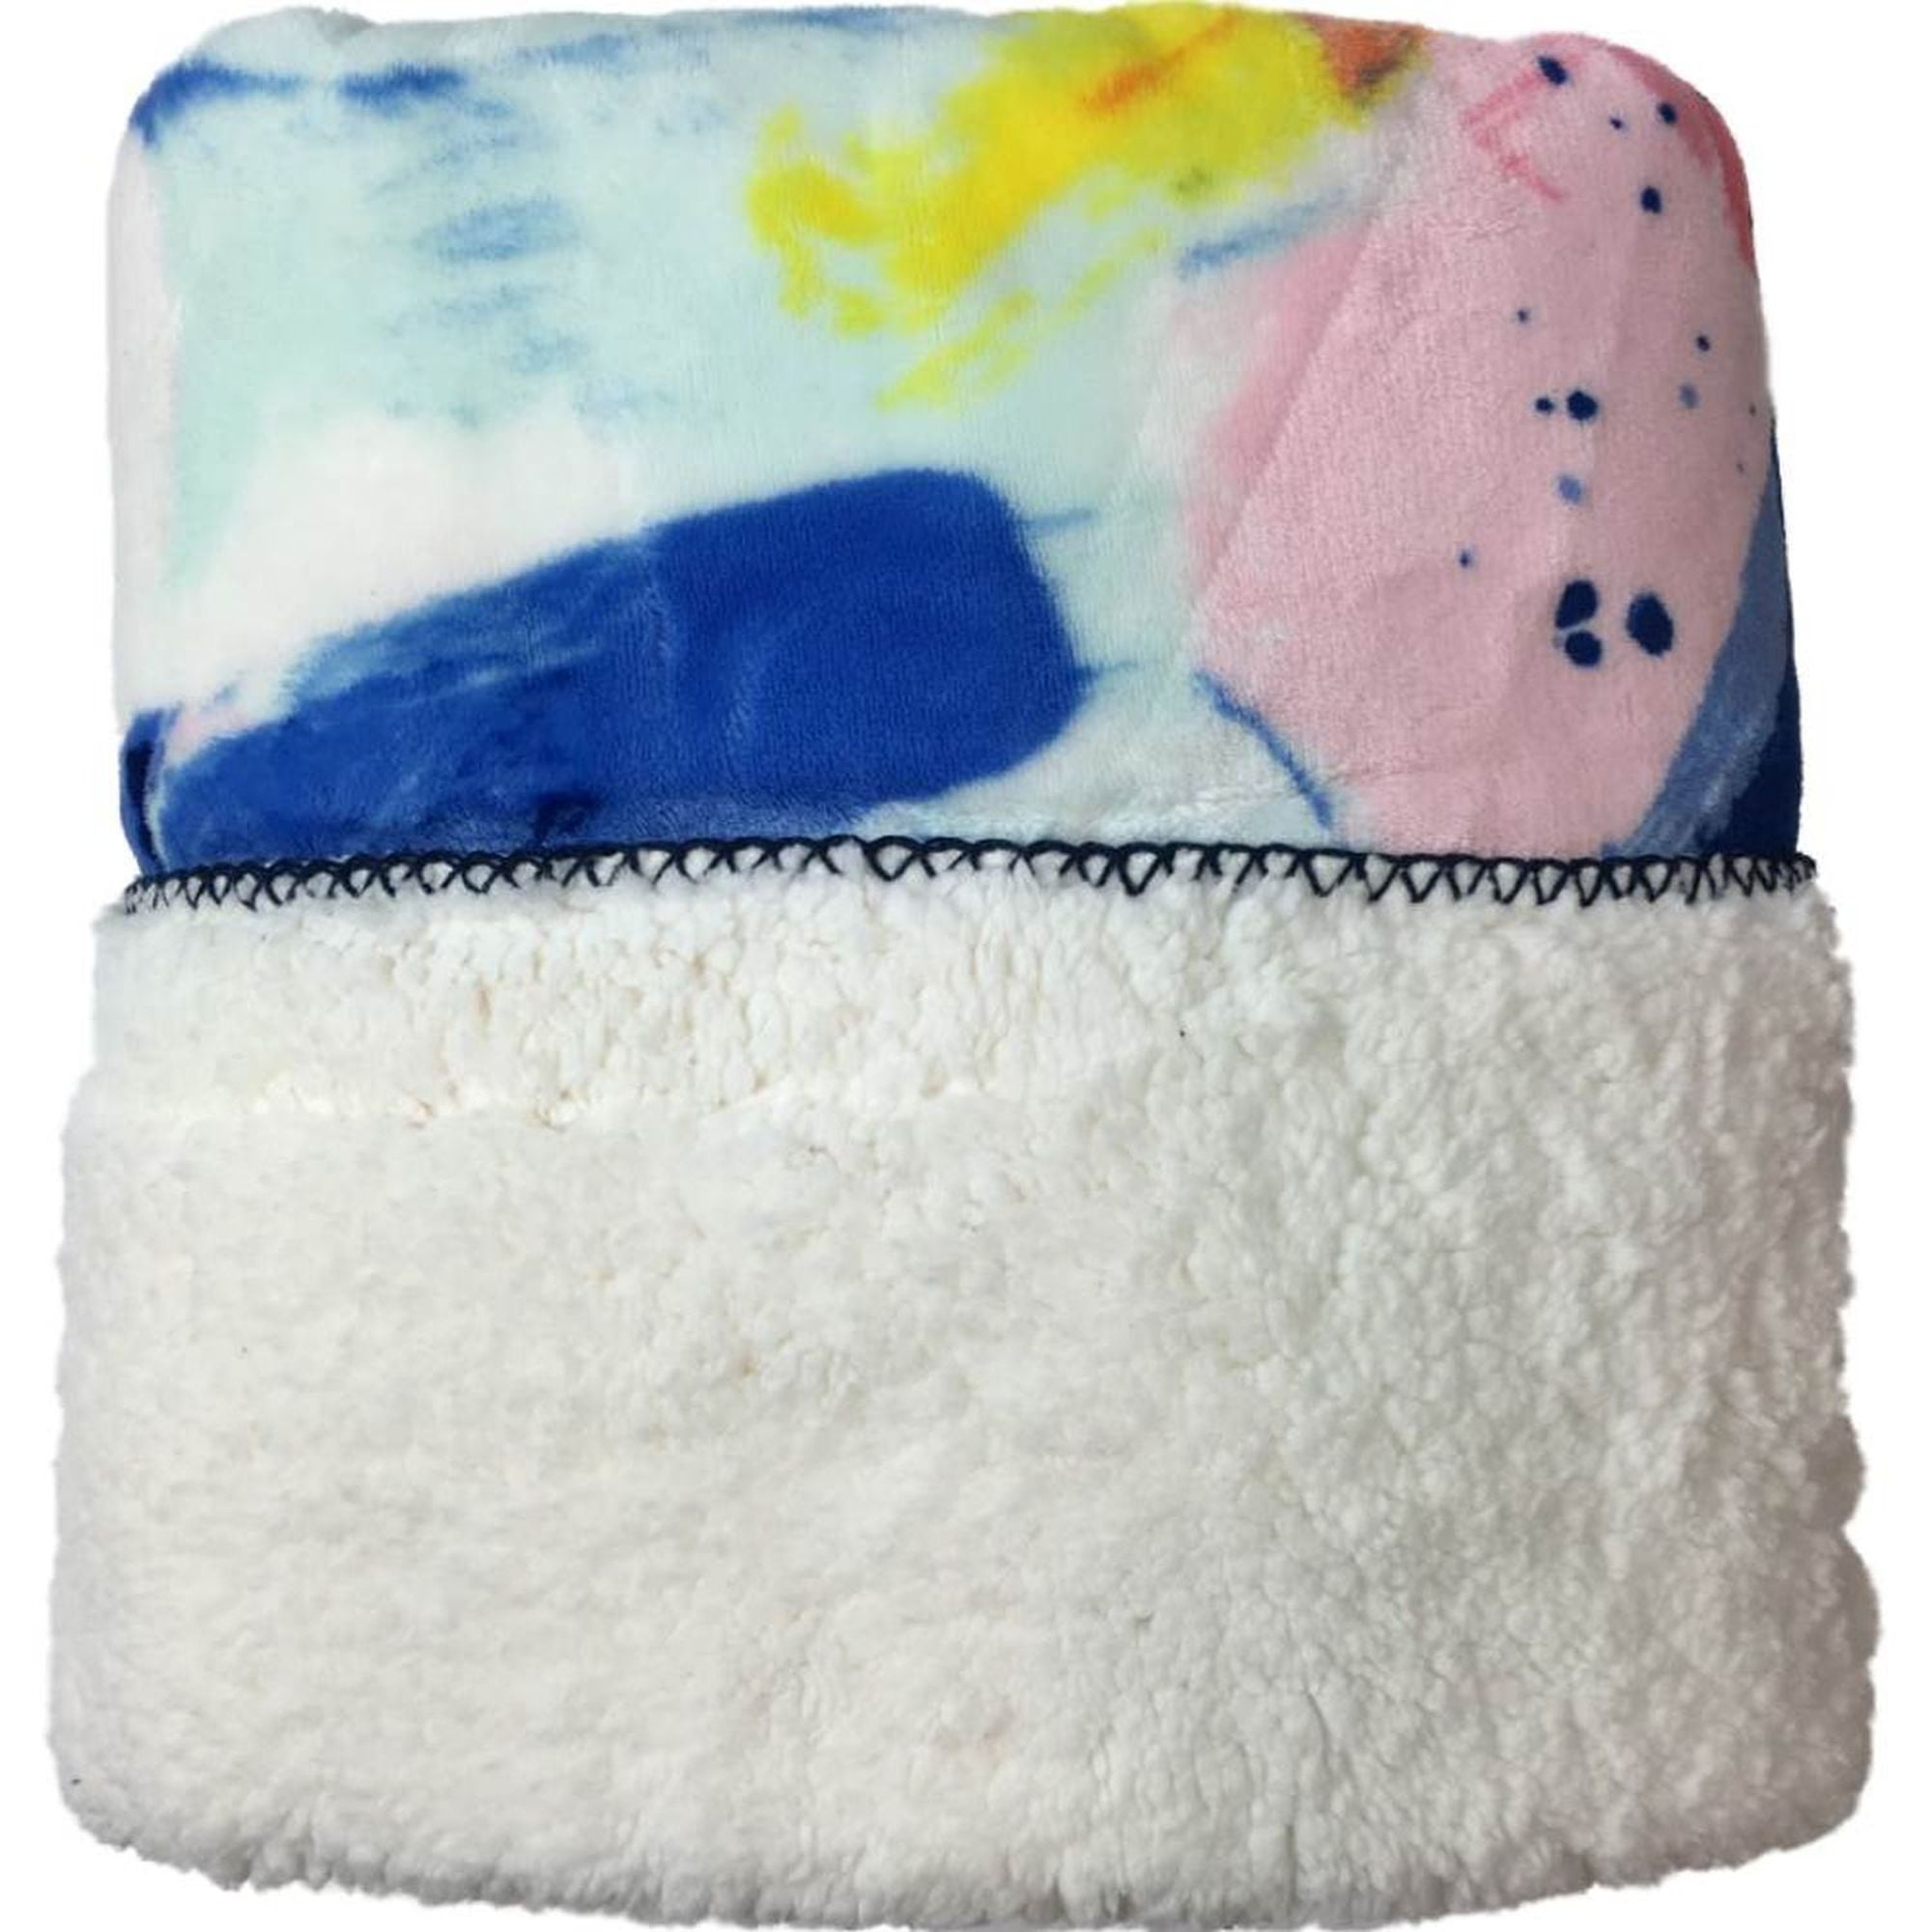 THE COMFY Original  Oversized Microfiber & Sherpa Wearable Blanket, Seen  On Shark Tank, One Size Fits All (Blush) 